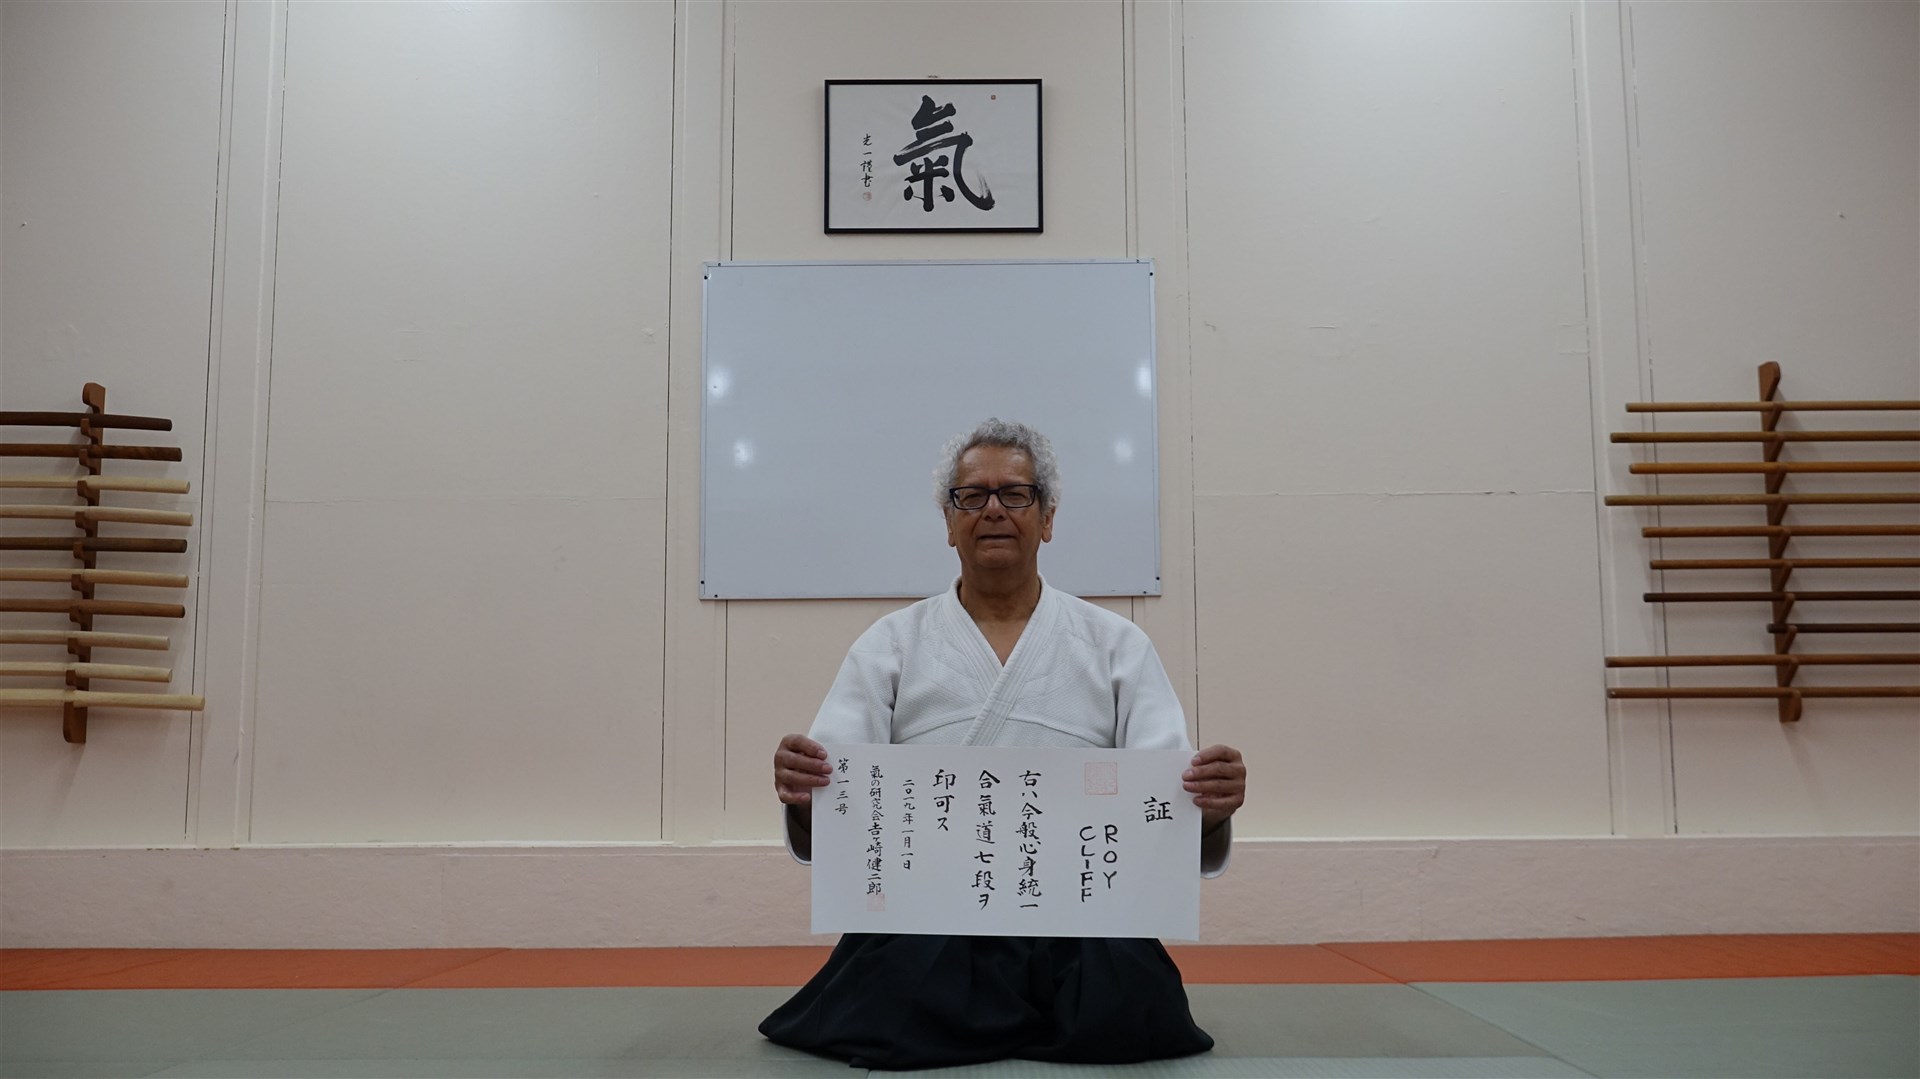 Roy Cliff is presented with his seventh dan in Aikido.